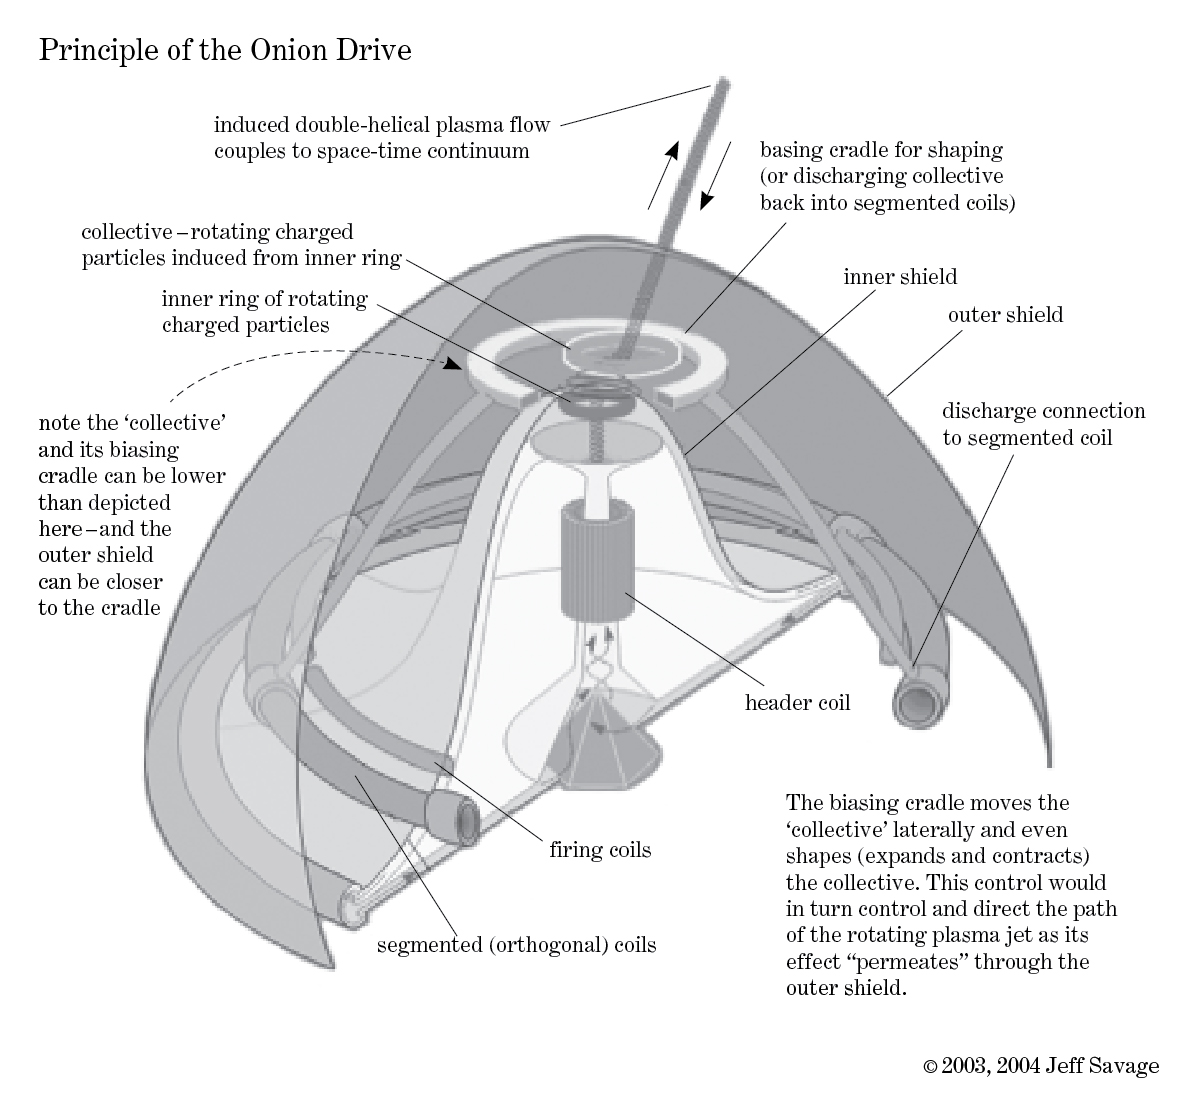 A diagram of the “UFO Onion Drive System.”